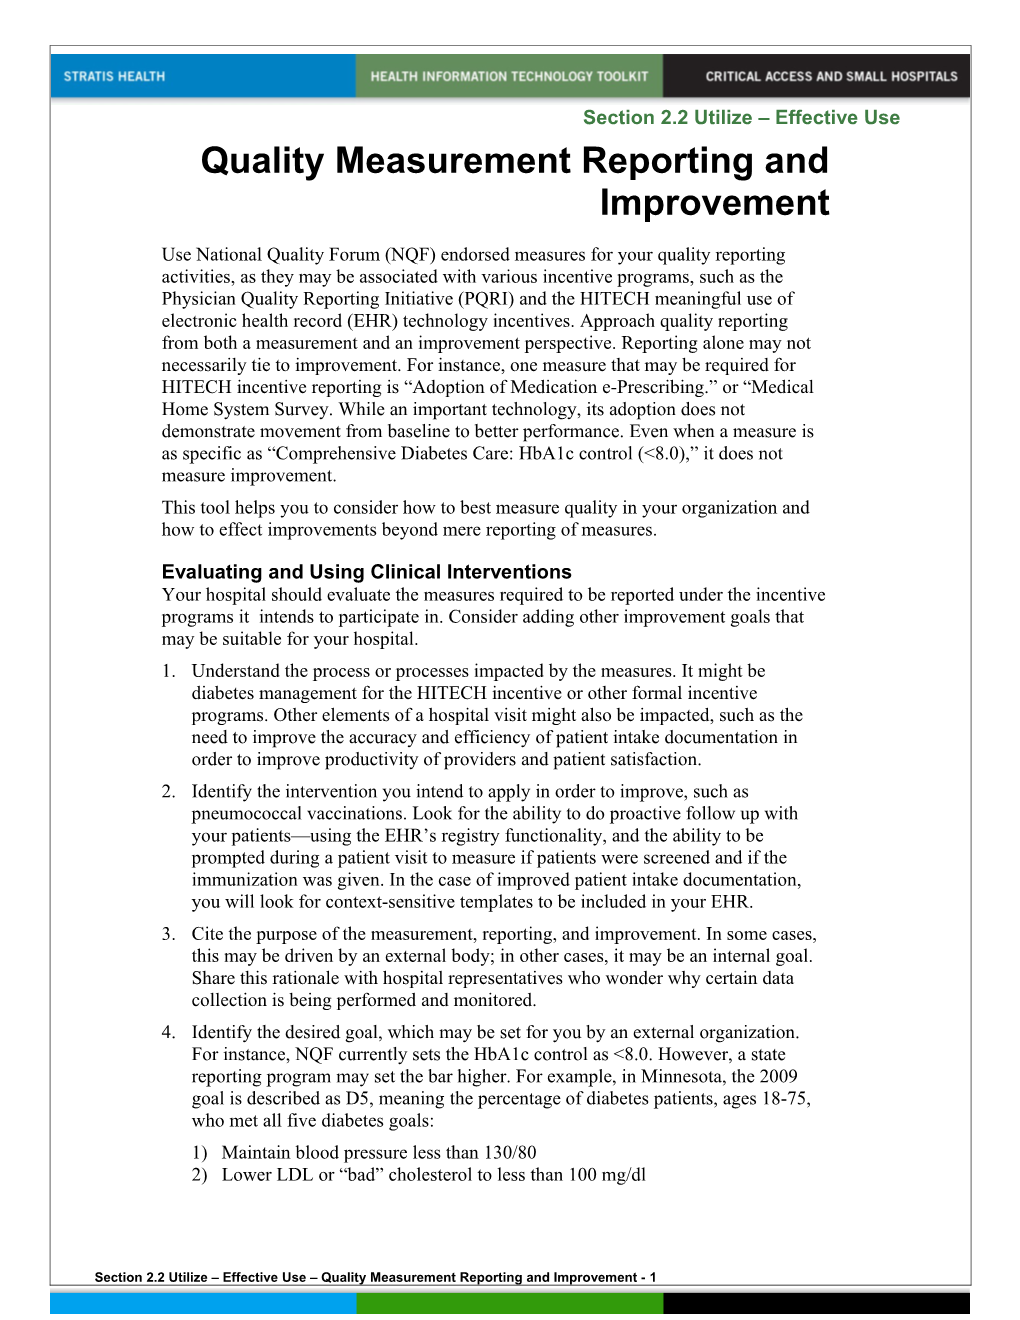 Quality Measurement Reporting and Improvement